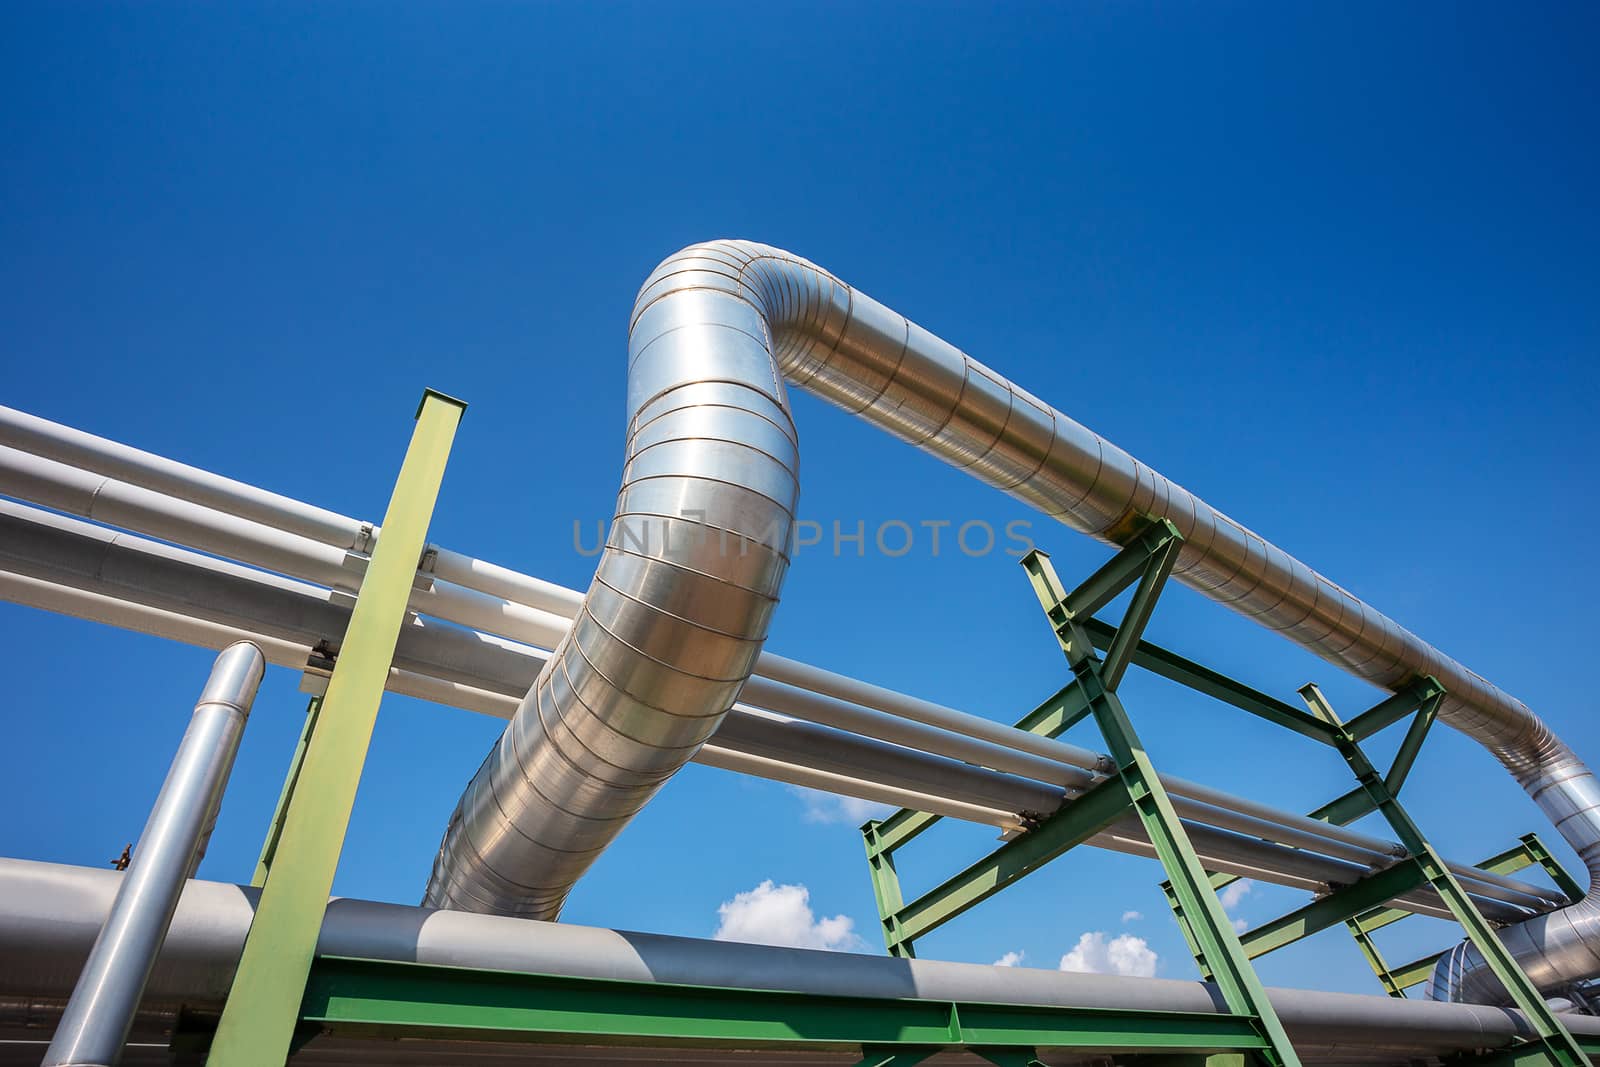 insulation of steam pipe for steam transportaion on lack in indu by kunchainub